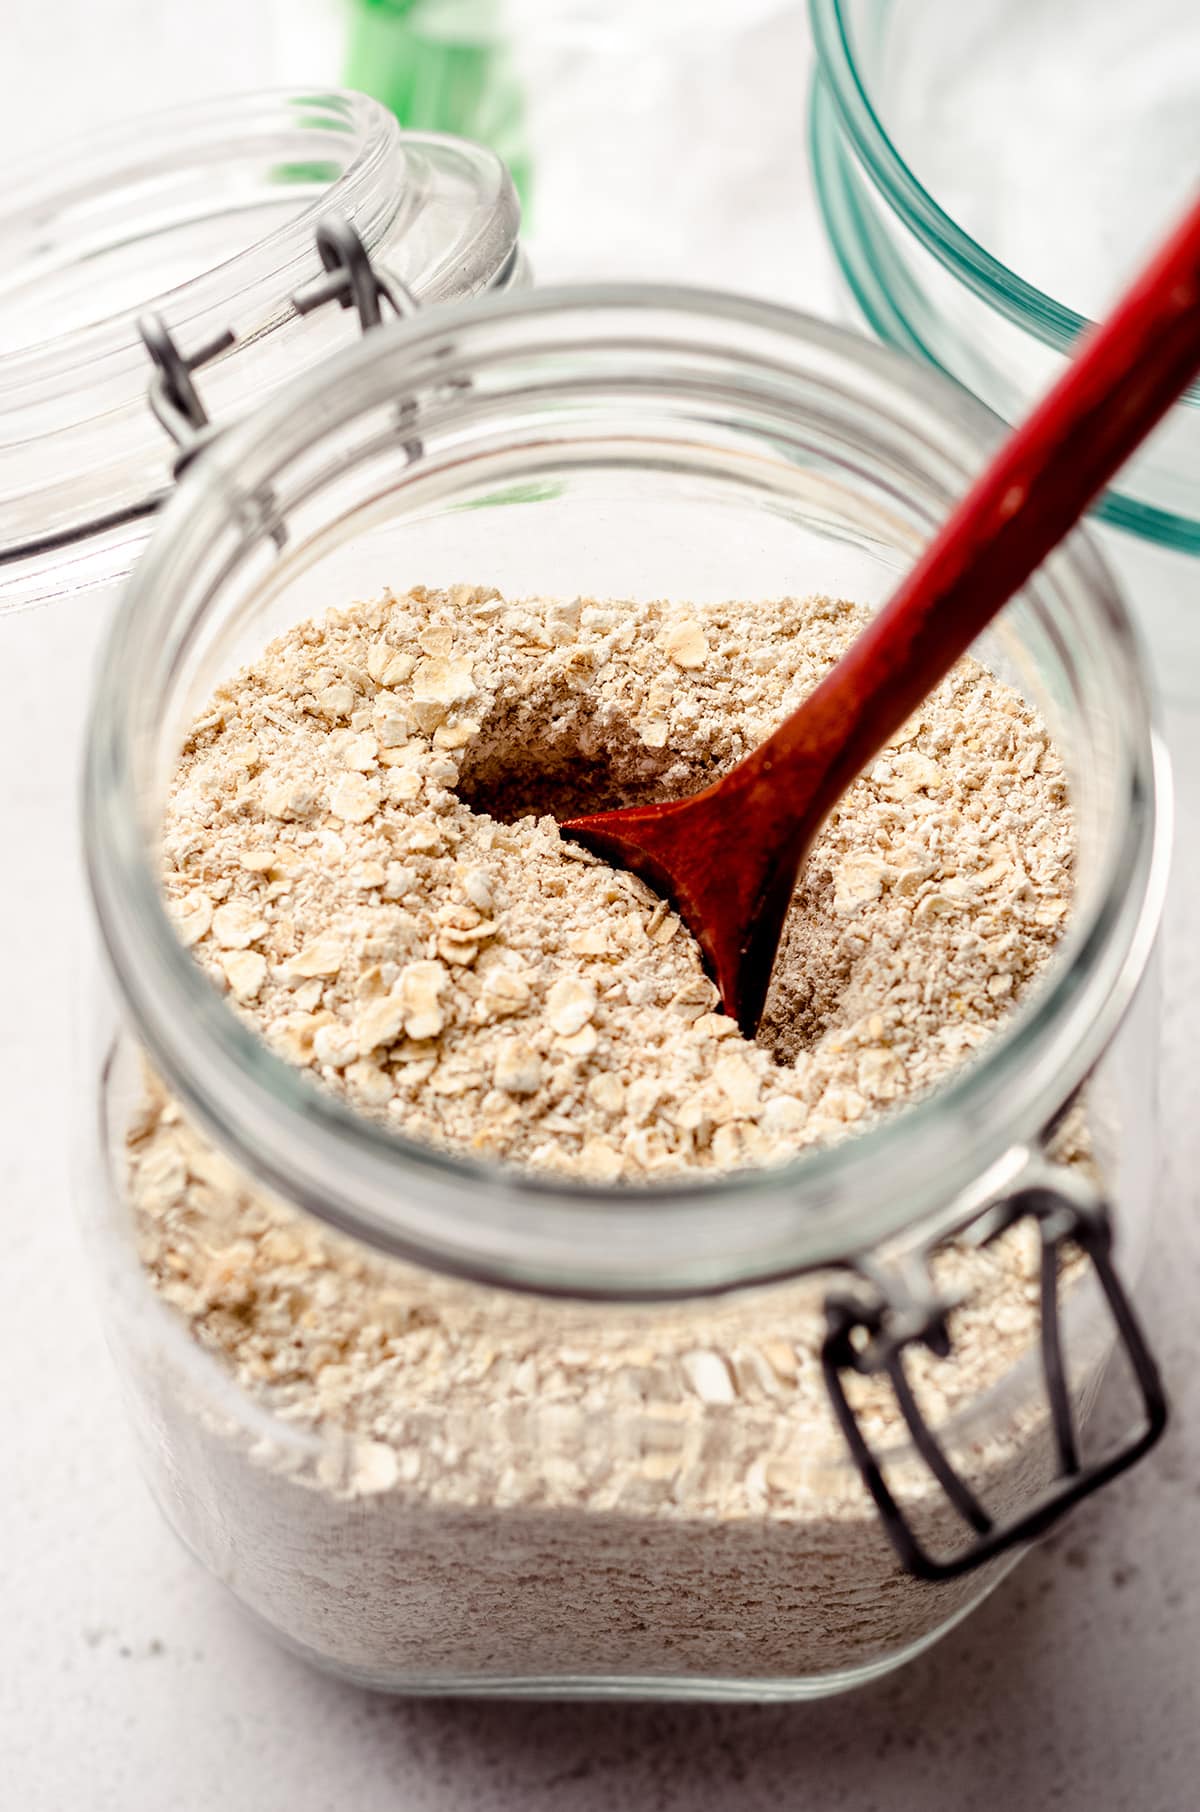 A large jar of oats with a wooden spoon in it.